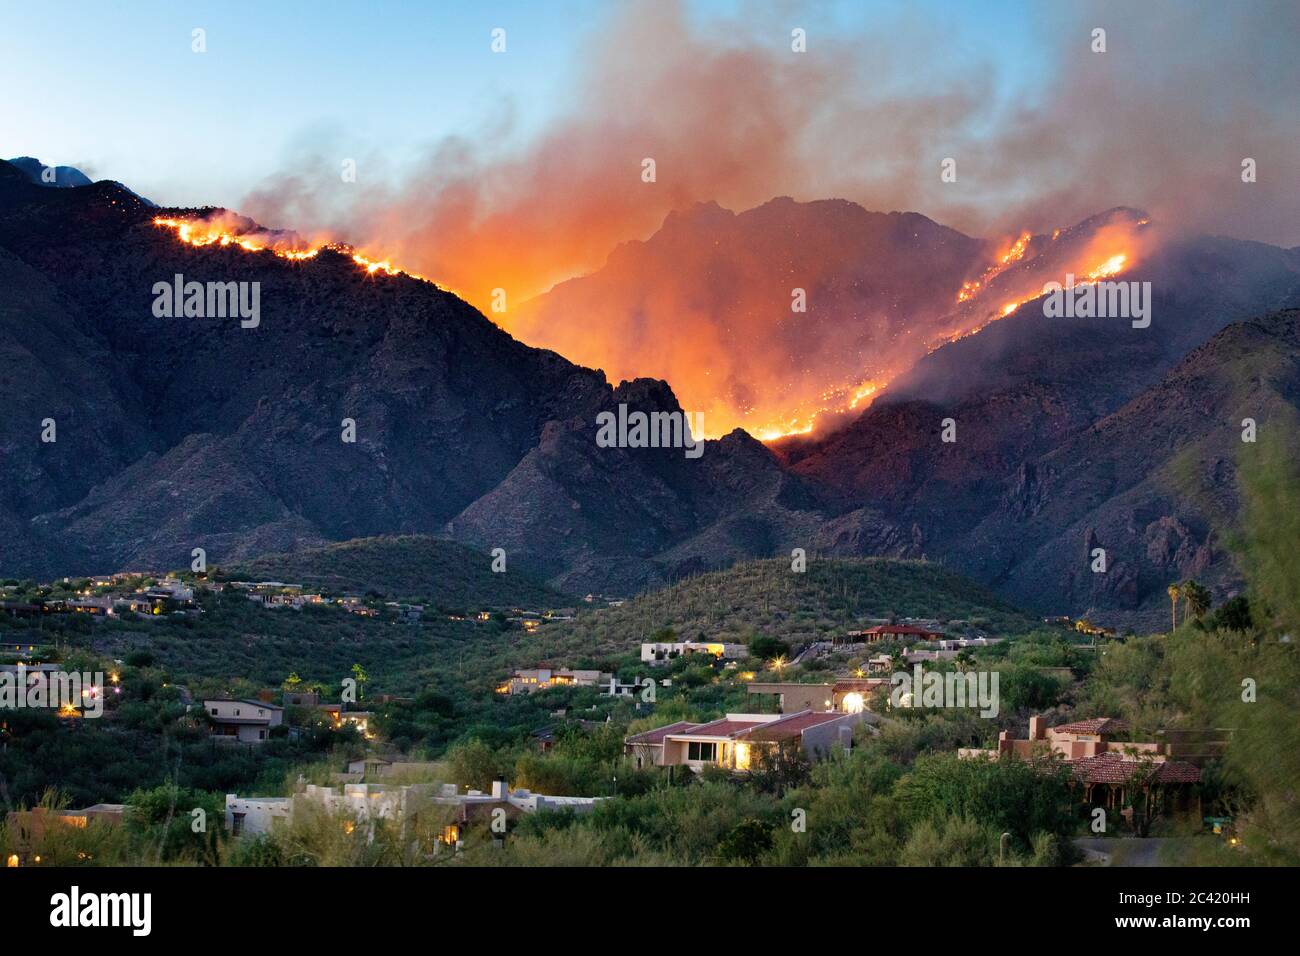 Bighorn Fire encroaching and threatening homes in the foothills of the Santa Catalina Mountains, Tucson, Arizona, USA Stock Photo